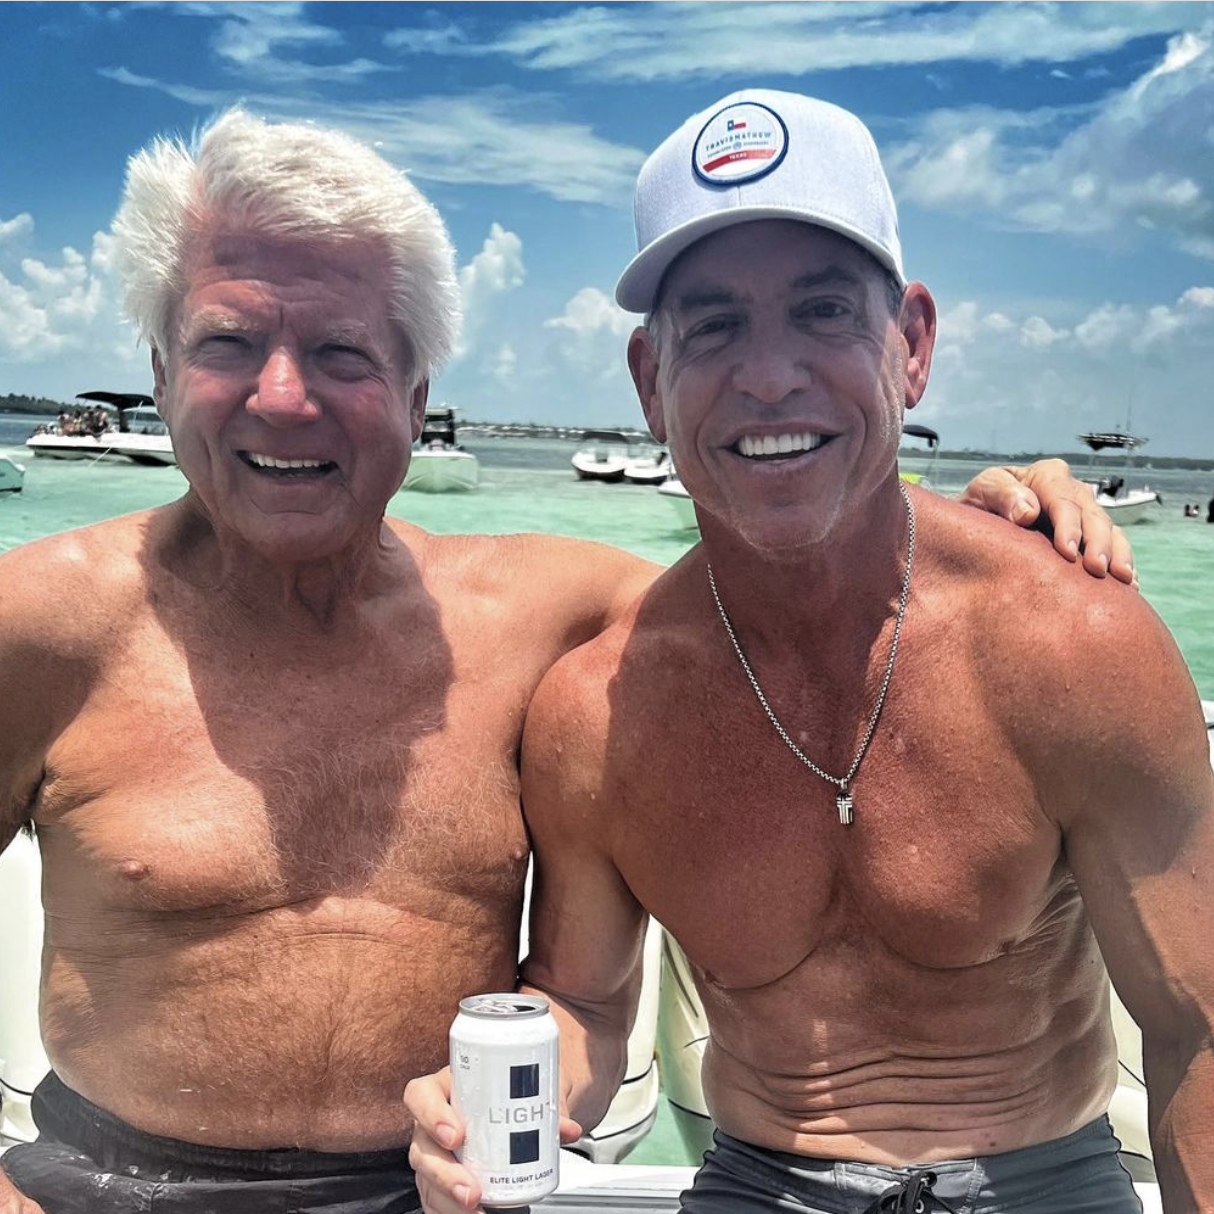 Troy Aikman Looks Jacked at 55 in a New Shirtless Beach Photo